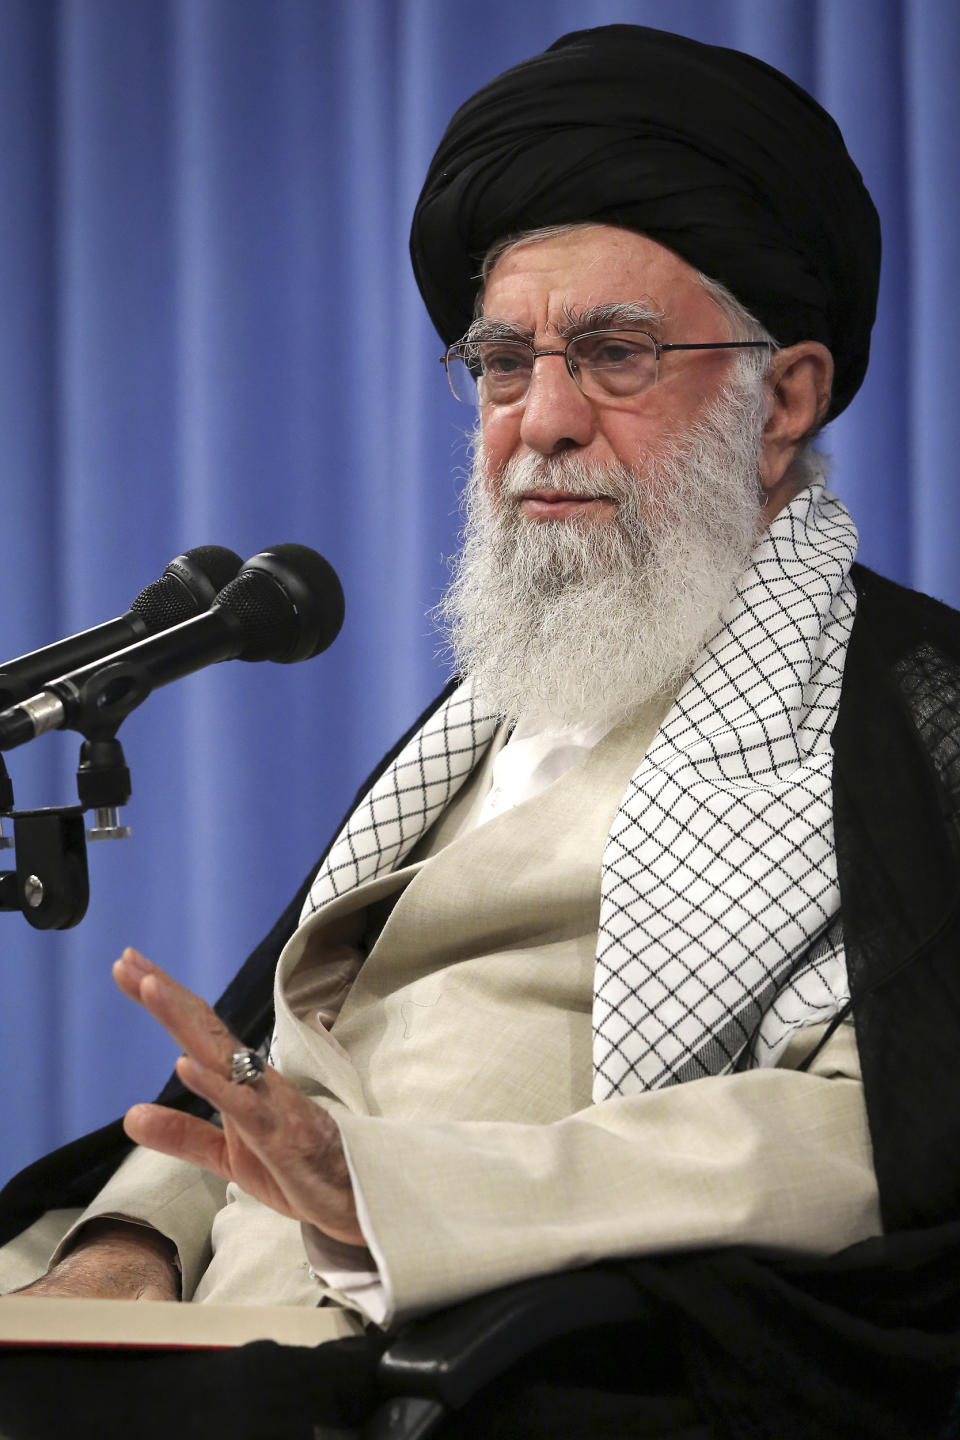 In this photo released by an official website of the office of the Iranian supreme leader, Supreme Leader Ayatollah Ali Khamenei speaks in a meeting in Tehran, Iran, Tuesday, Sept. 17, 2019. Khamenei says "there will be no talks with the U.S. at any level" — remarks apparently meant to end all speculation about a U.S.-Iran meeting at the U.N. later this month. (Office of the Iranian Supreme Leader via AP)